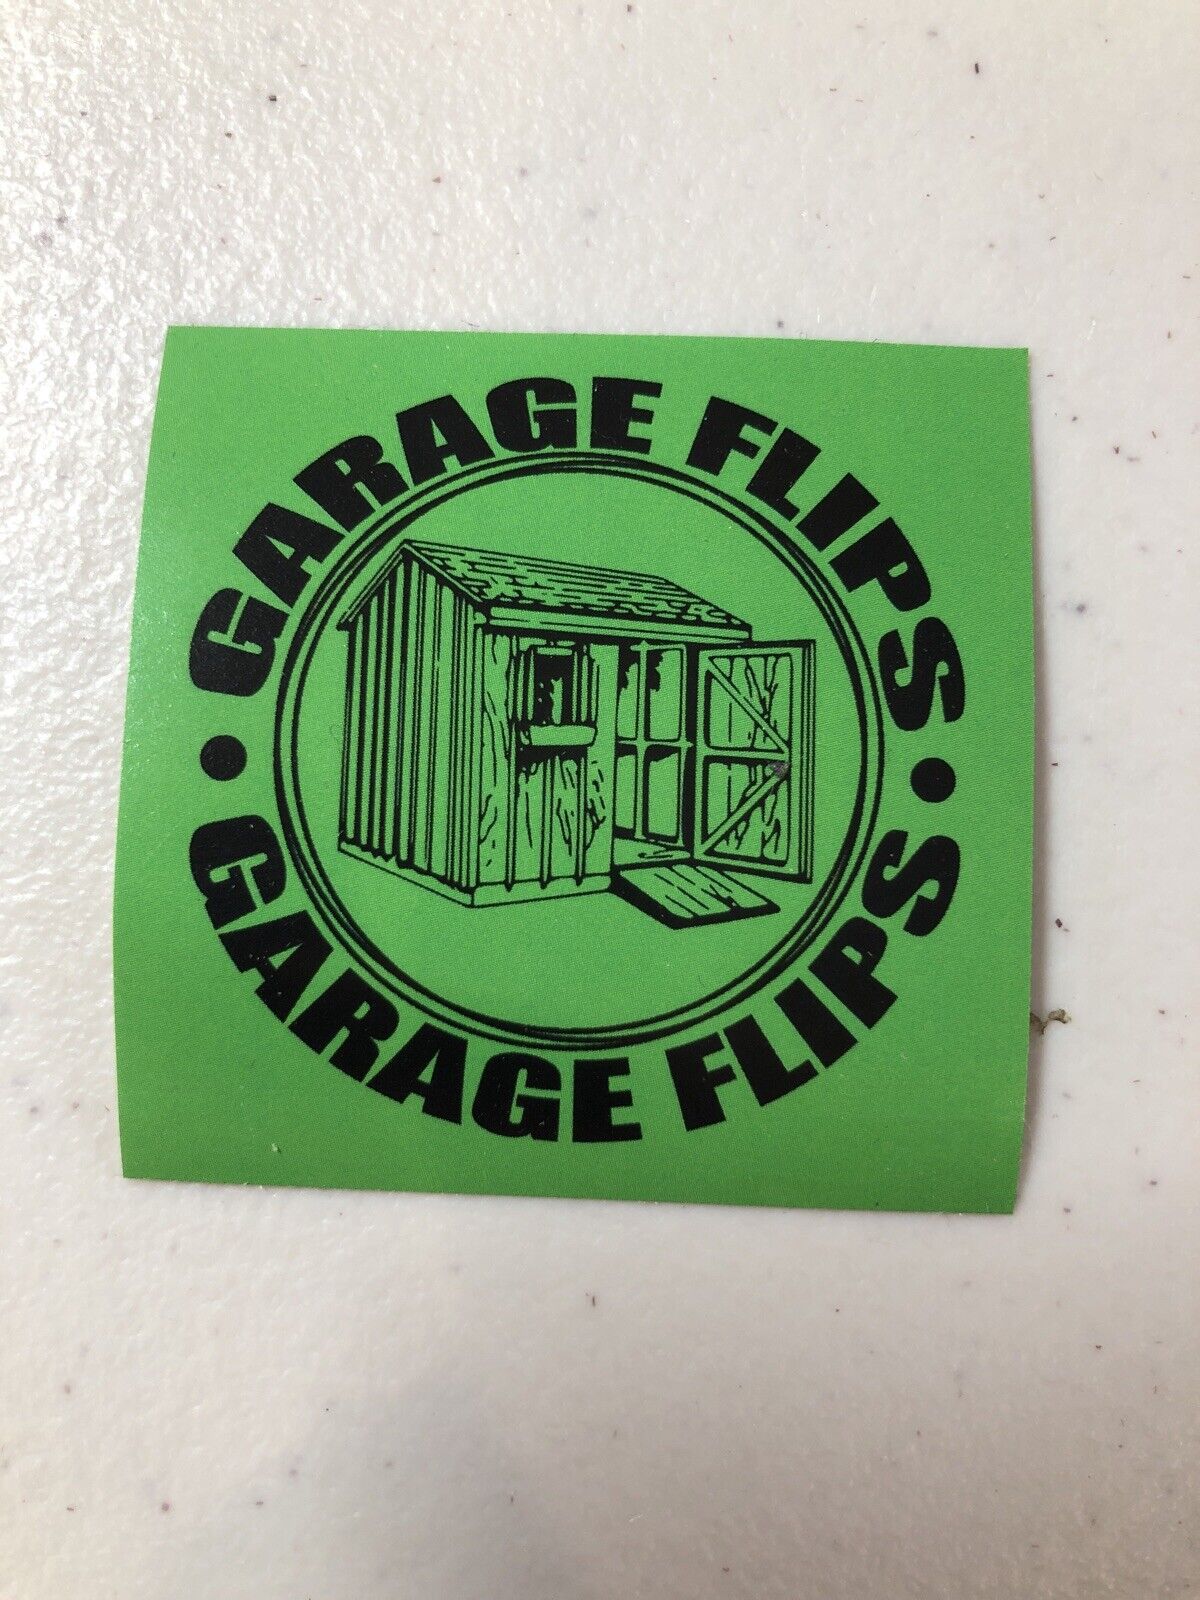 Garage Flips - Shed Flips - Collectible Green Stickers